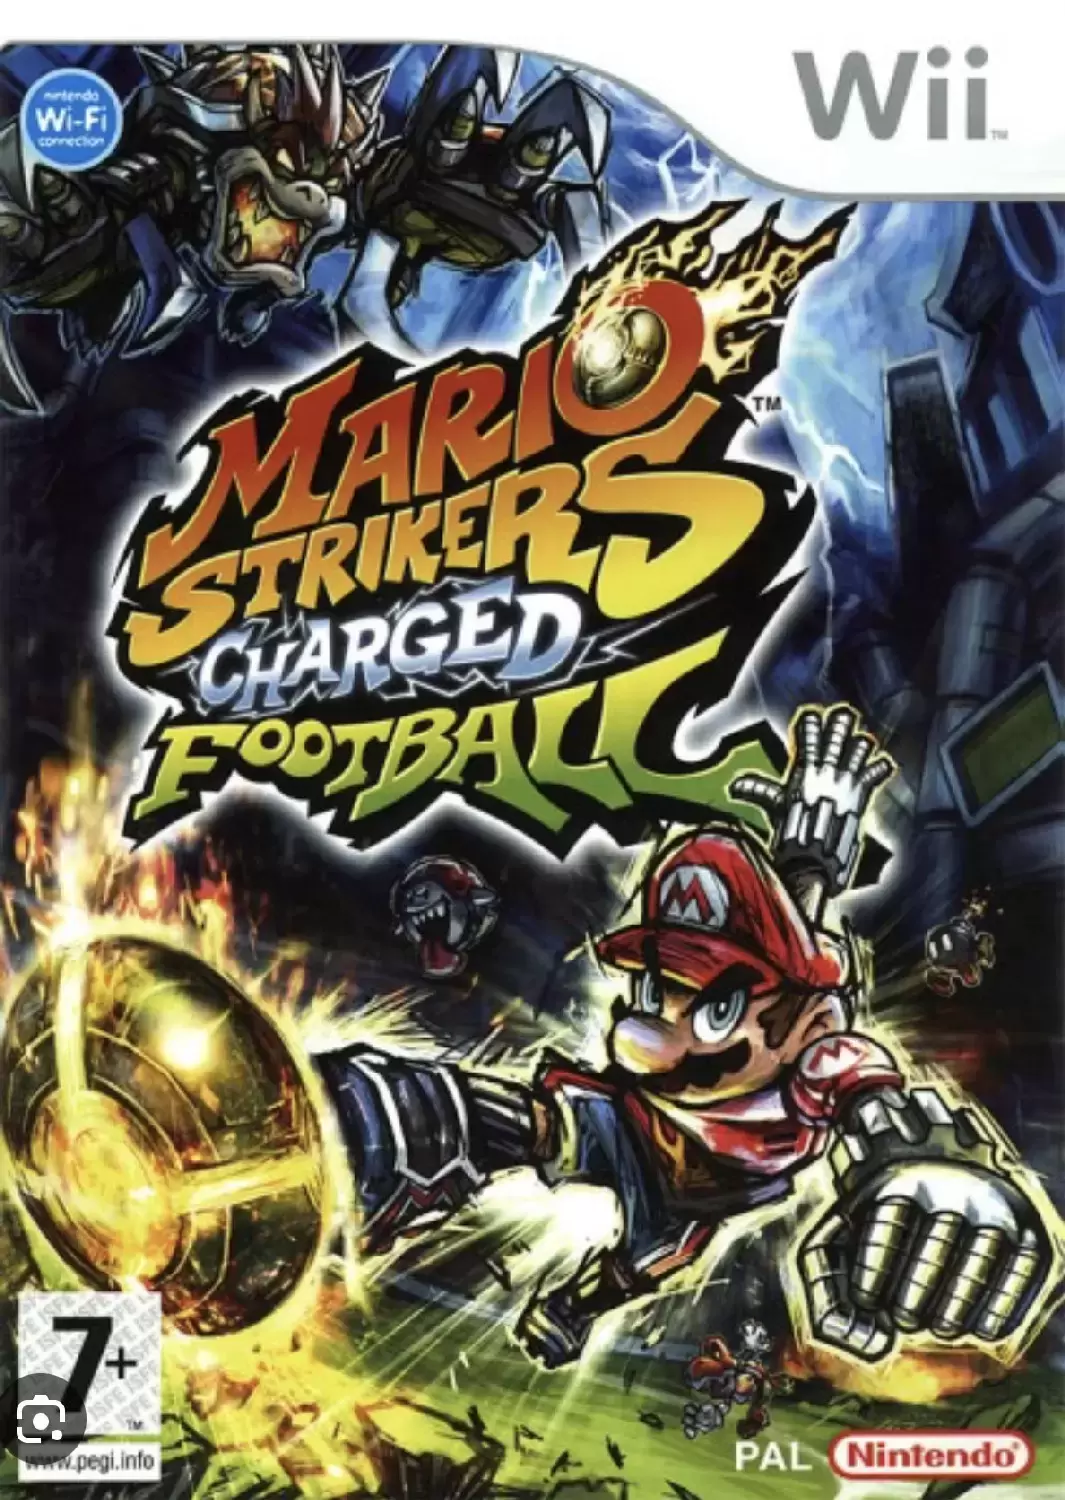 Nintendo Wii Games - Mario Strikers Charged Football